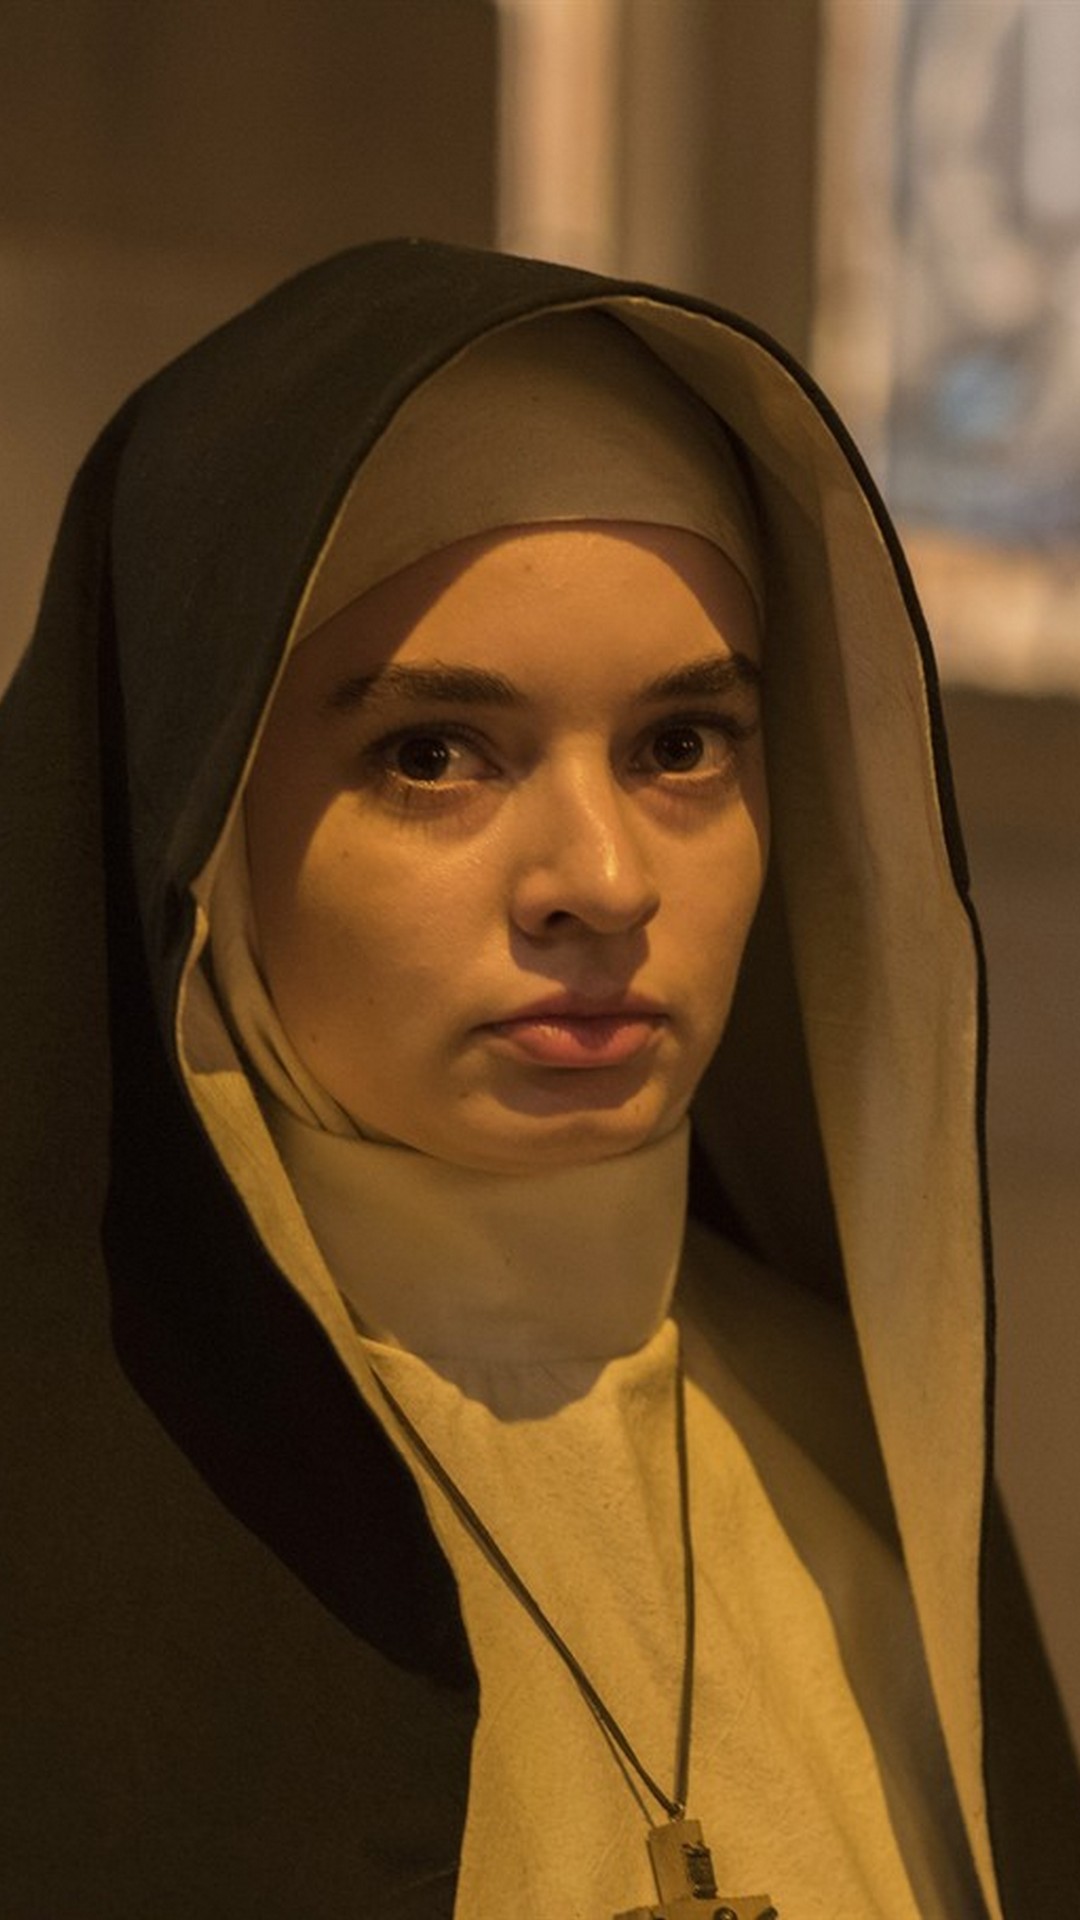 The Nun Movie Wallpaper Android With Image Resolution - Charlotte Hope The Nun - HD Wallpaper 